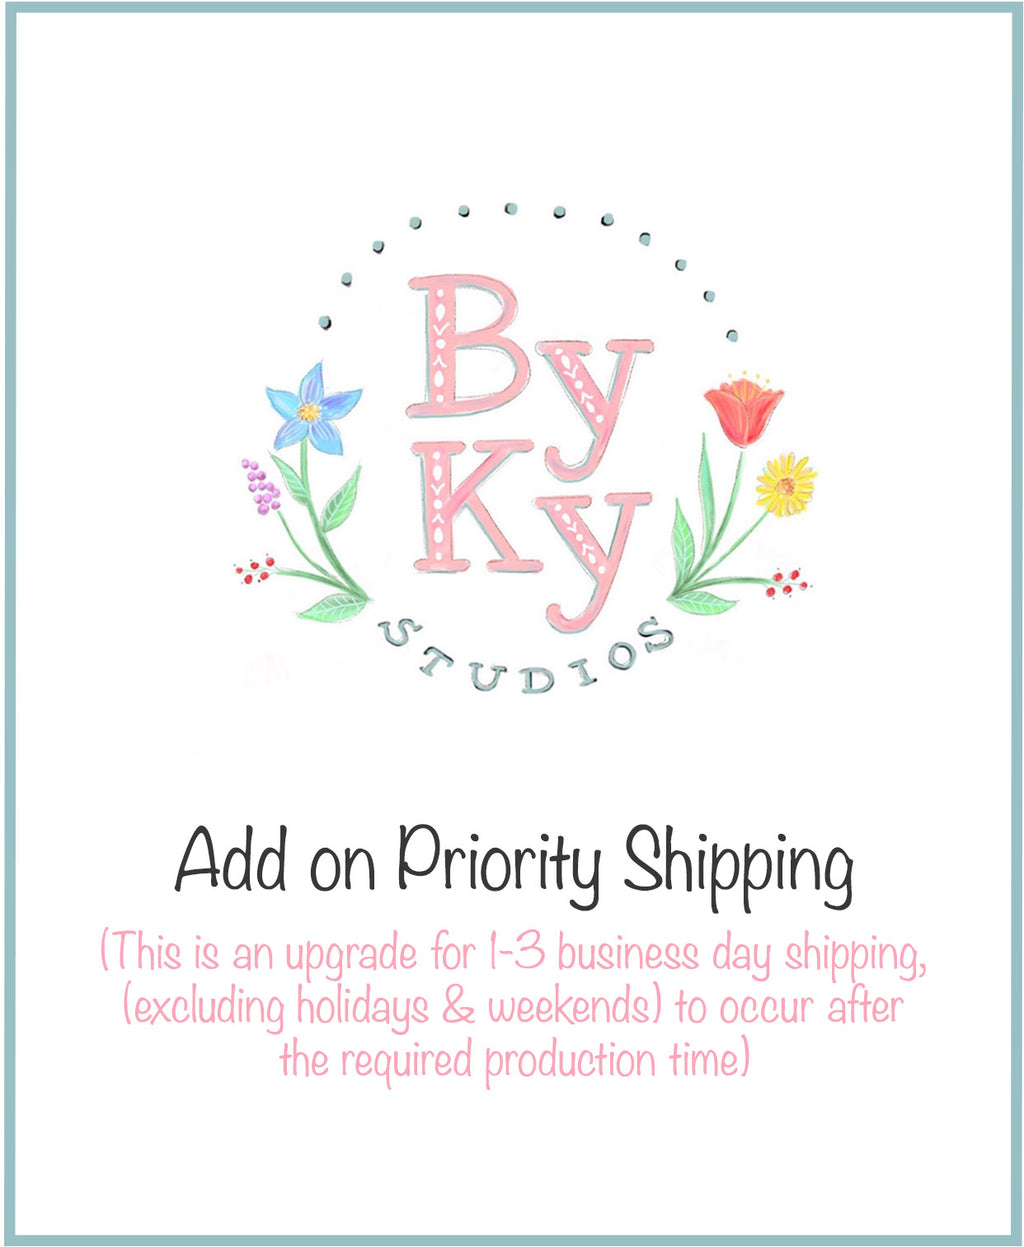 Add on Priority Shipping